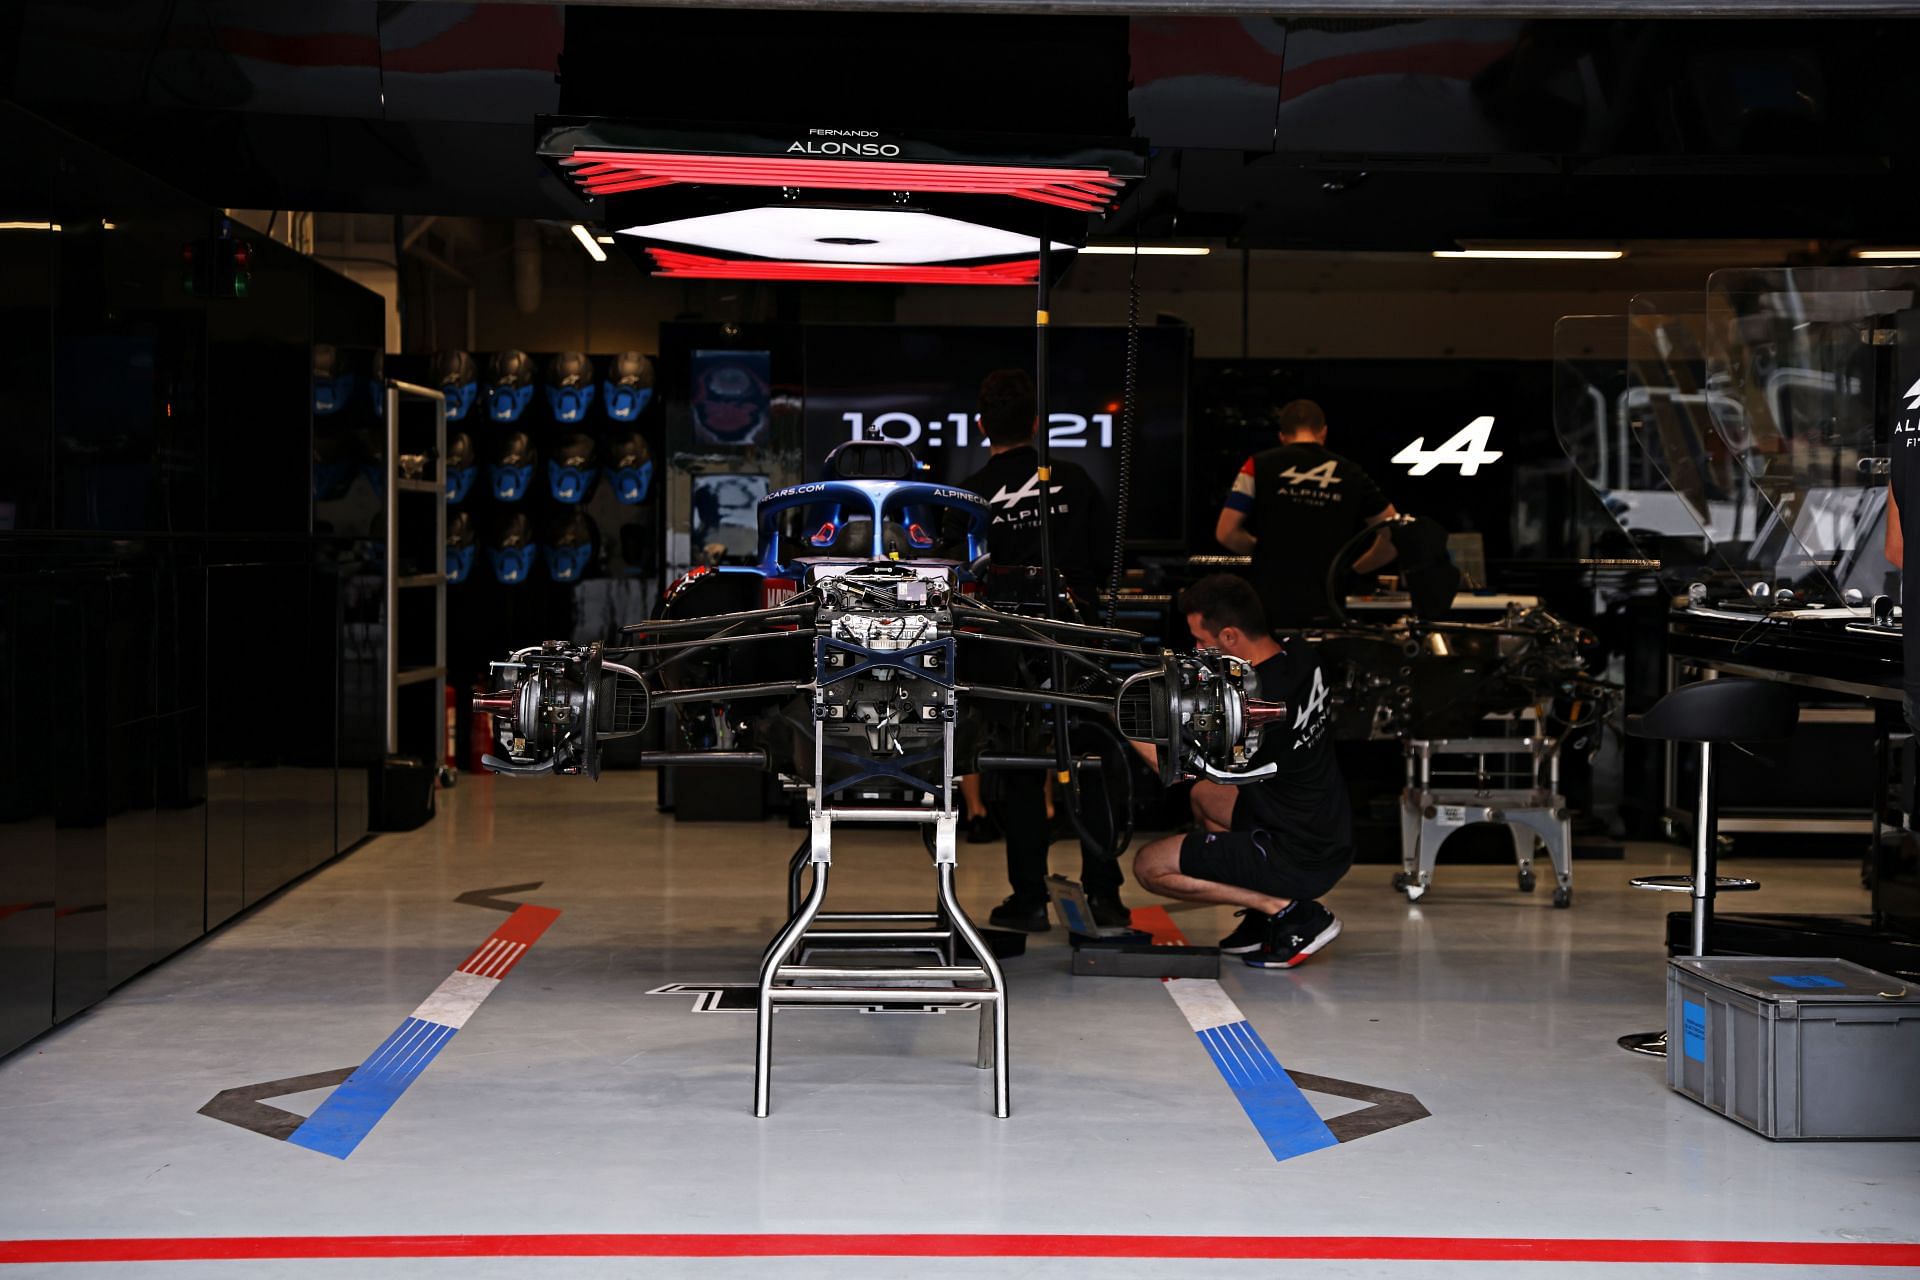 The Alpine F1 team works in the garage during previews ahead 2021 Brazilian Grand Prix (Photo by Buda Mendes/Getty Images)